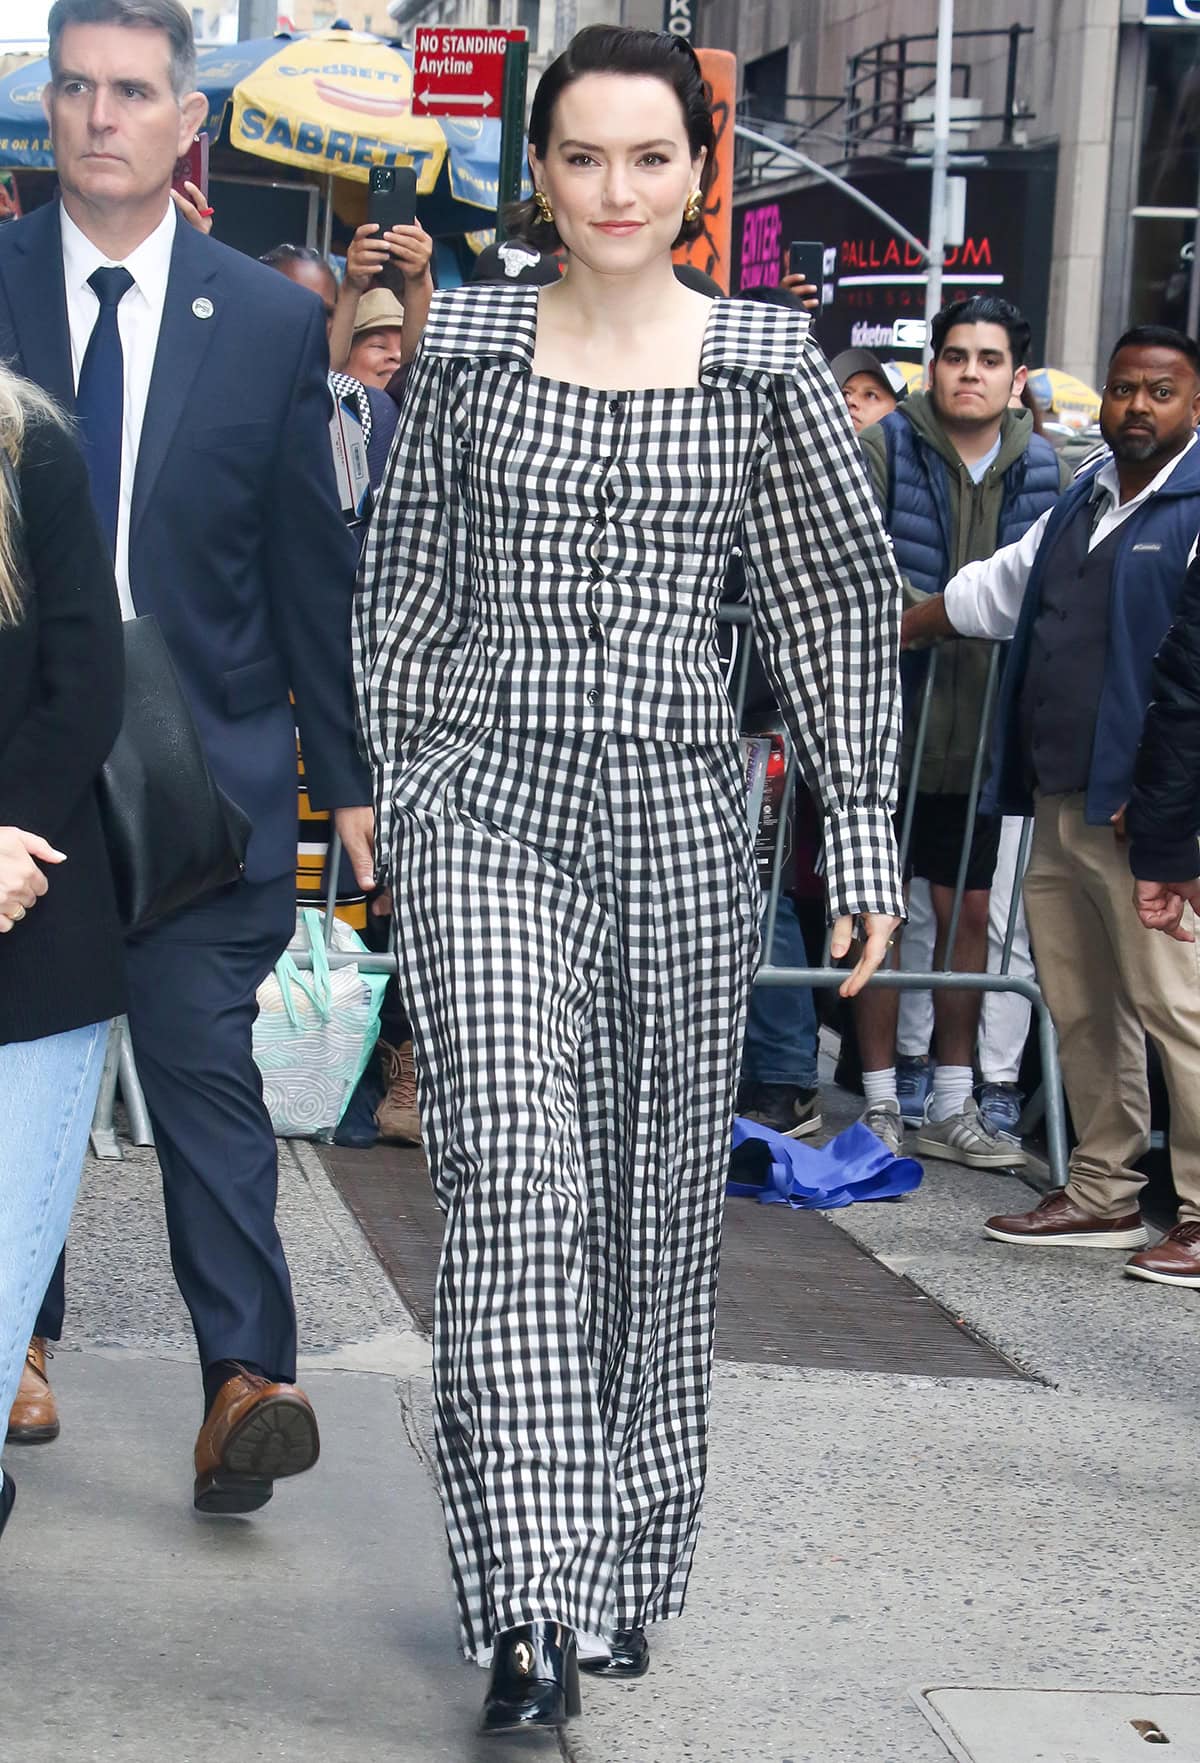 Daisy Ridley wears a summery gingham-patterned top and pants by Adeam for her appearance on Good Morning America